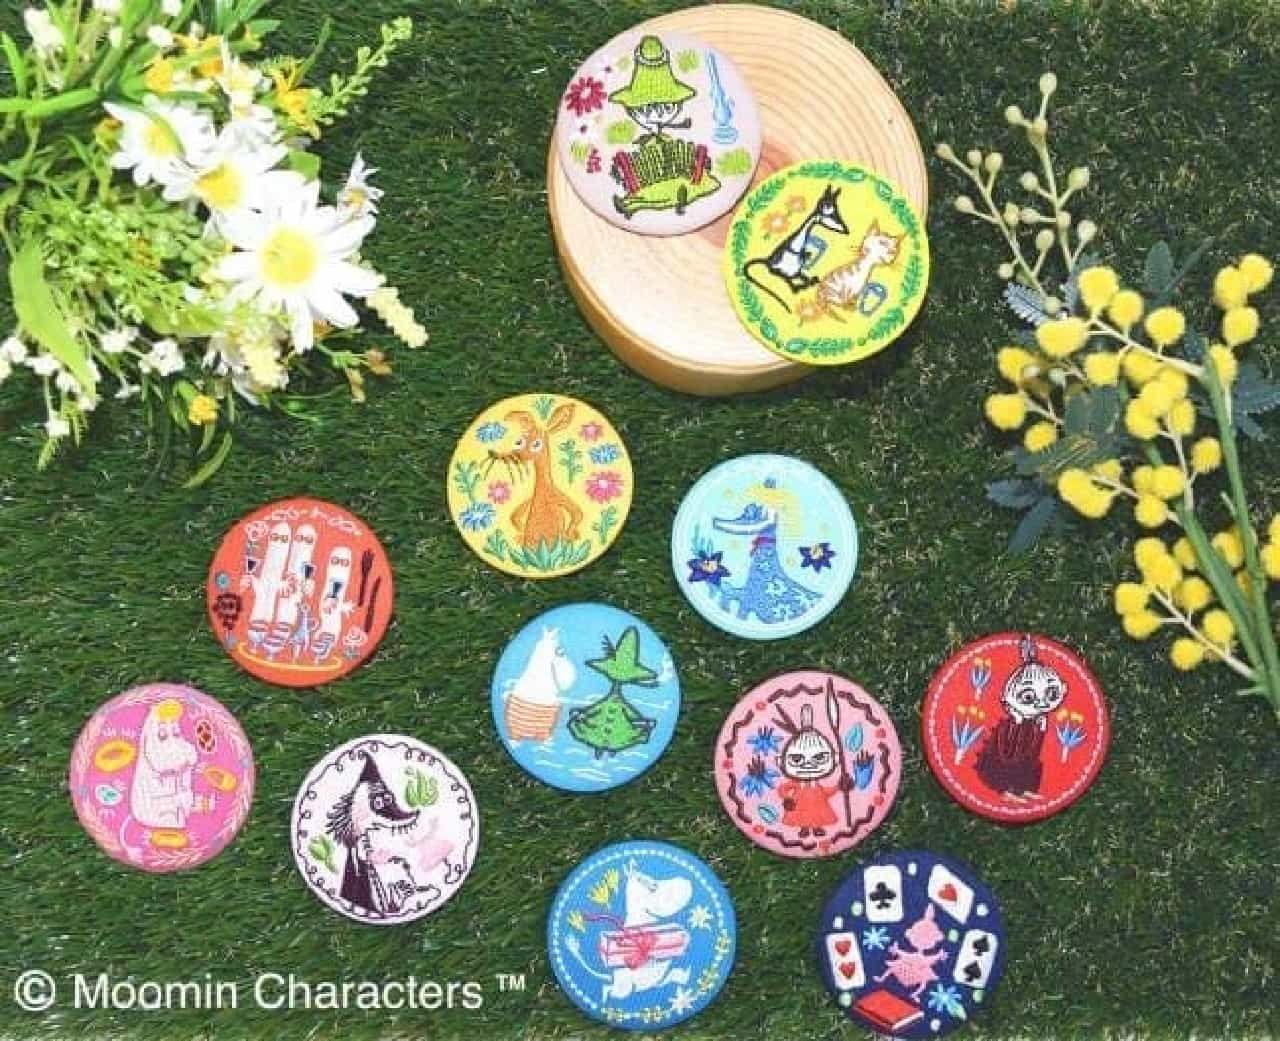 Cute "embroidery brooch collection" of Moomin and Little My